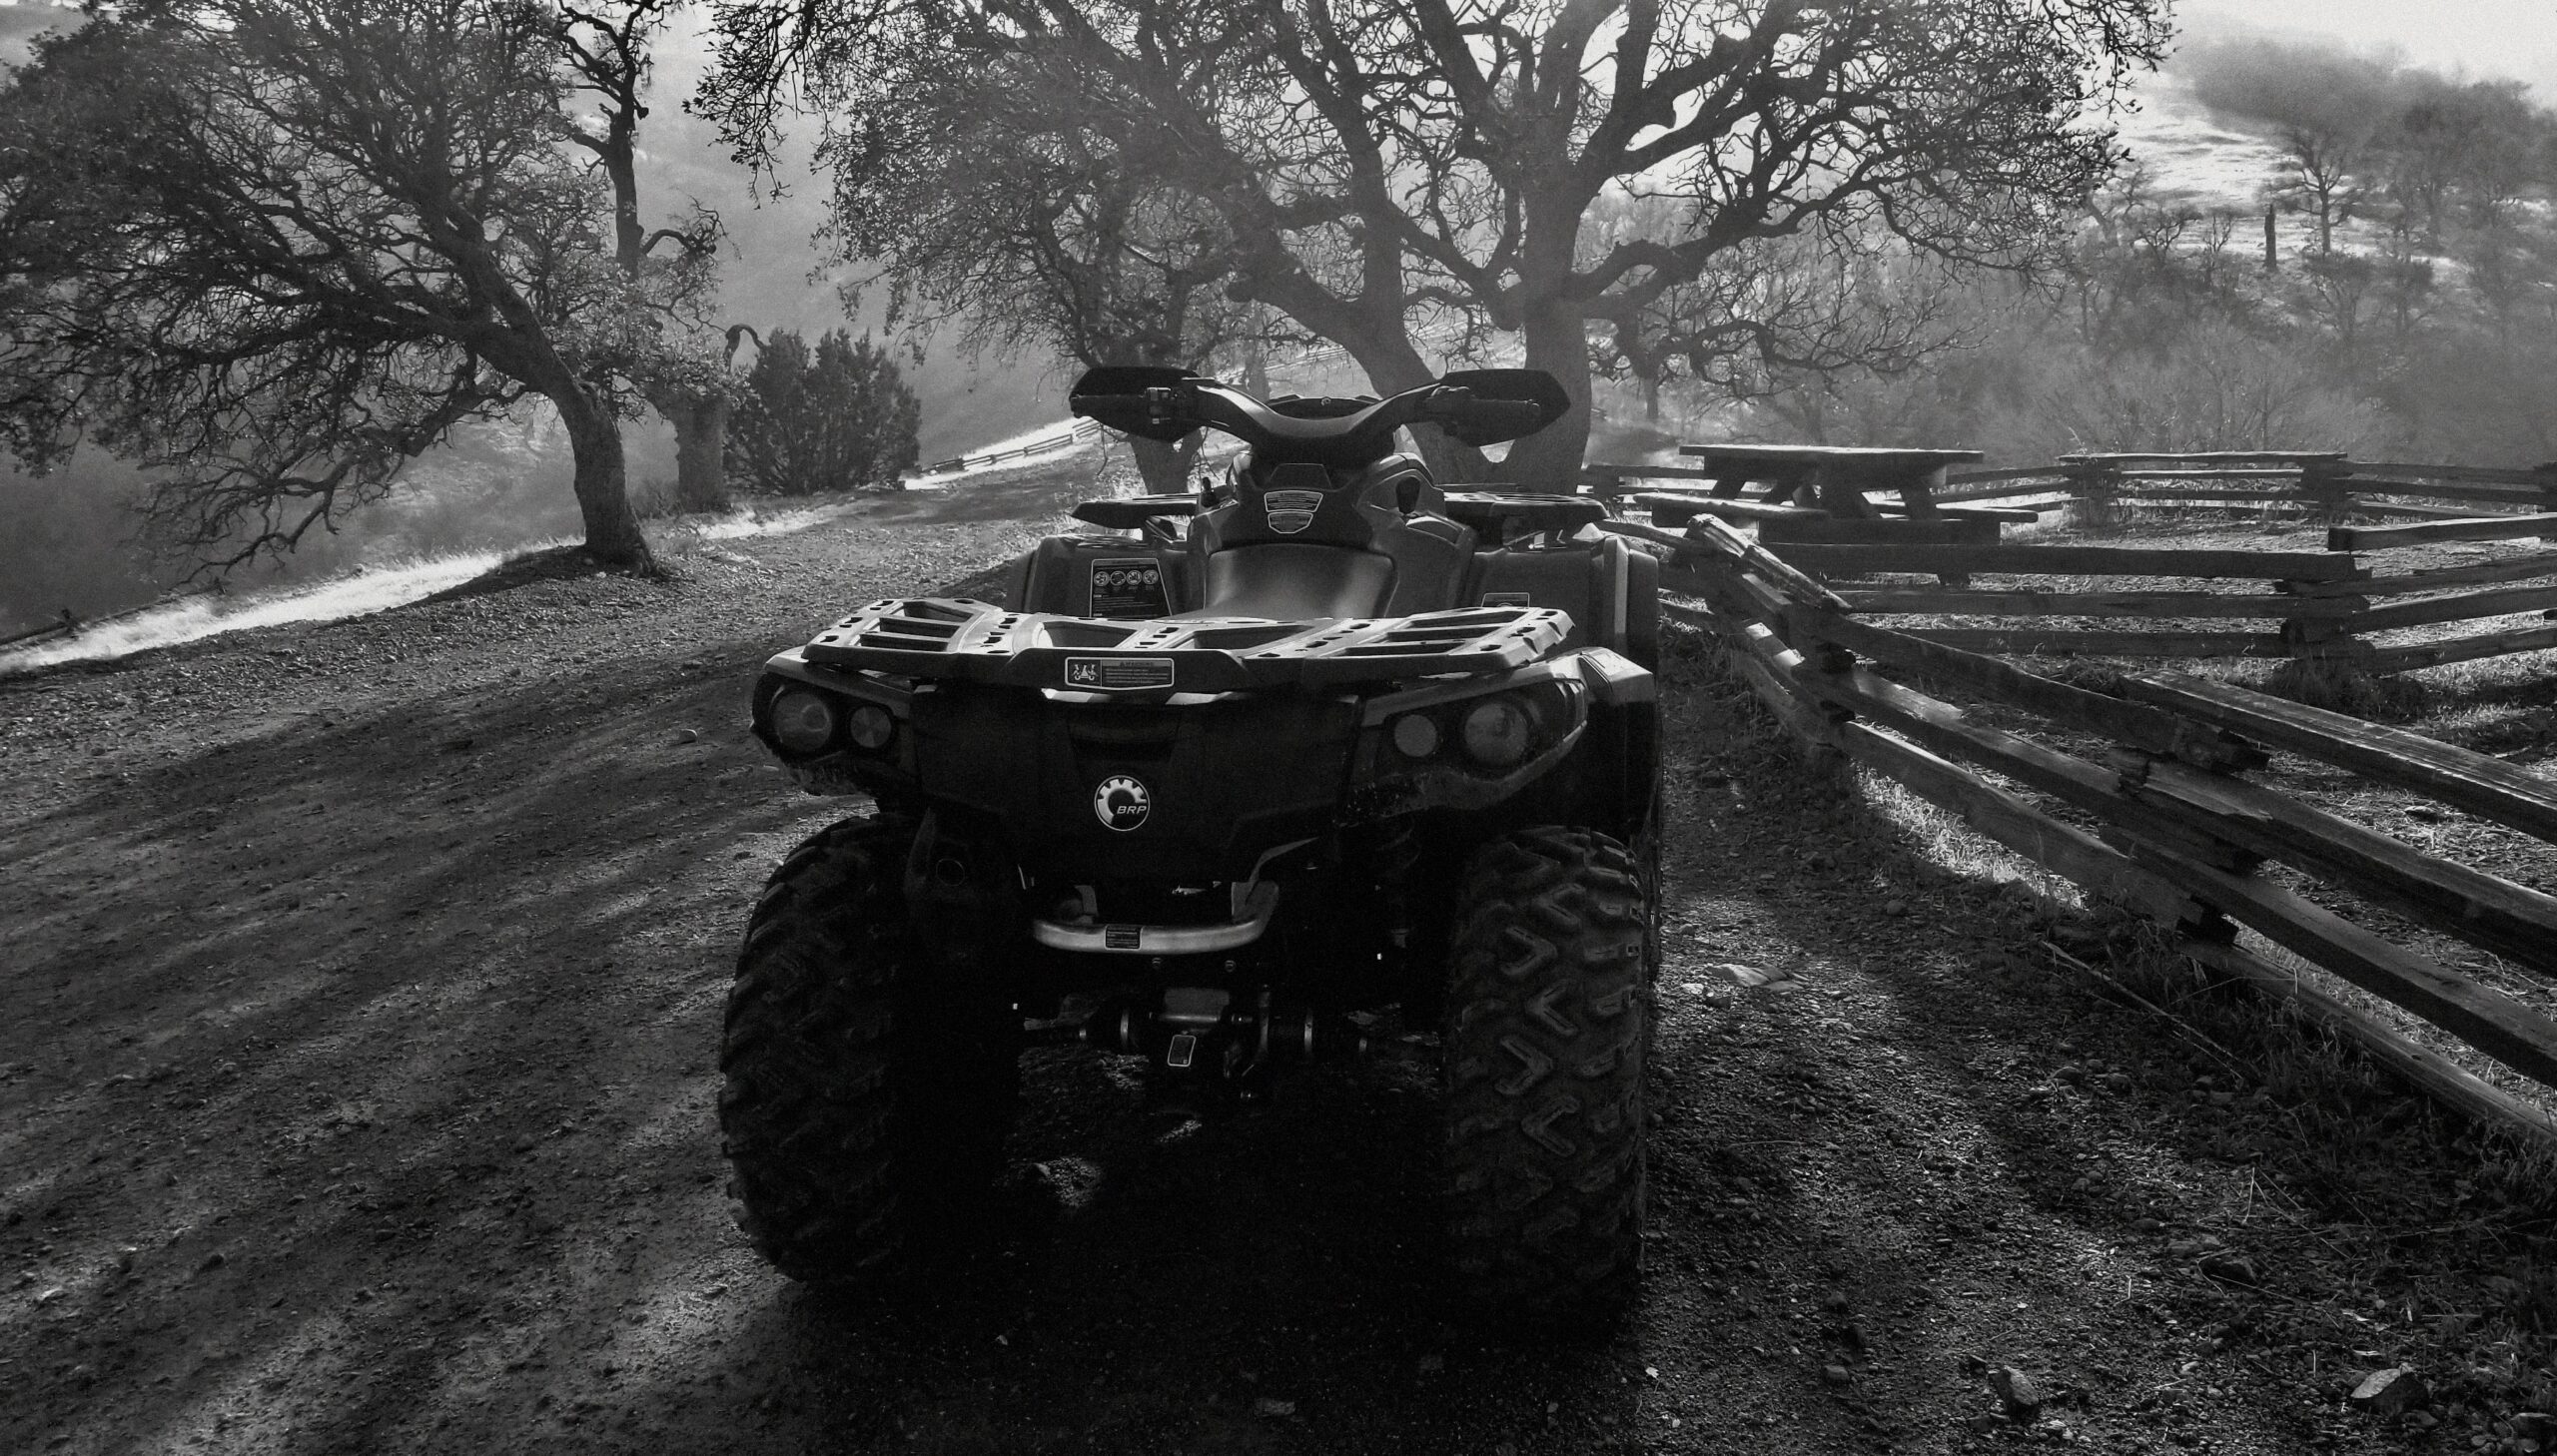 This is a black and white picture of a Polaris Ranger 500 in the woods.